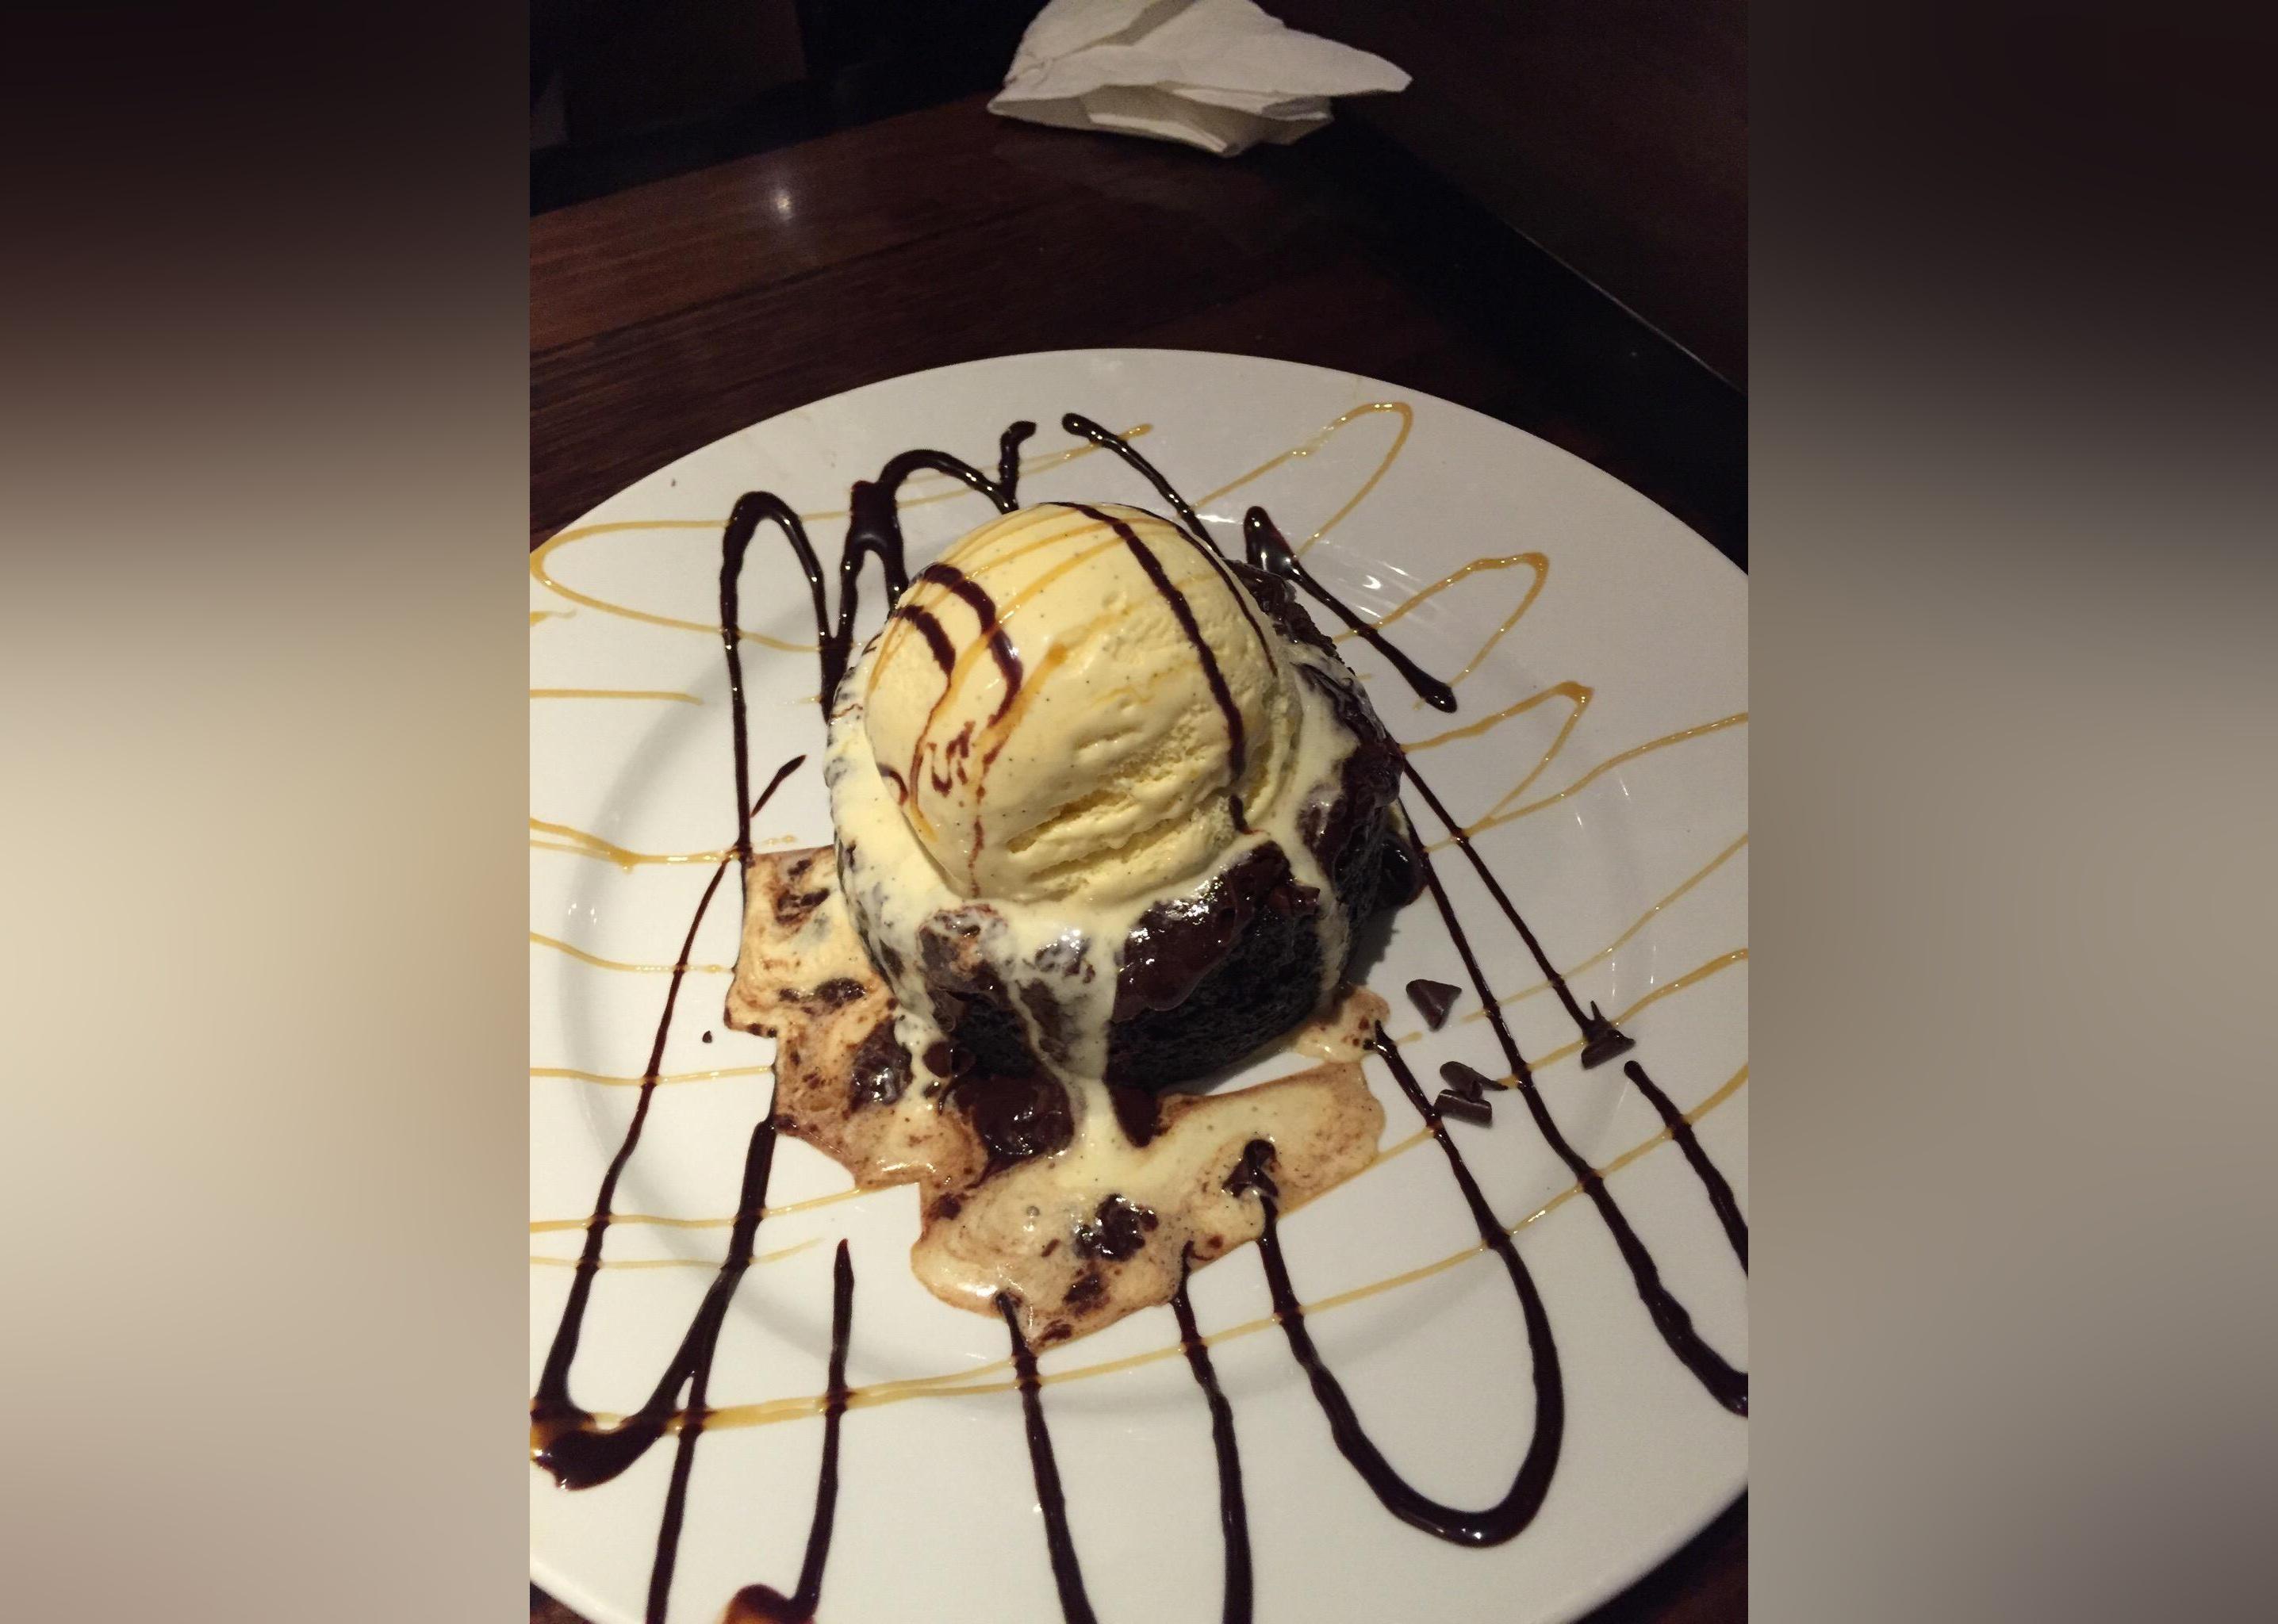 <p>- Rating: 4.0 / 5 (94 reviews)<br>- Detailed ratings: Food (4.0/5), Service (4.5/5), Value (4.0/5)<br>- Type of cuisine: American, Steakhouse<br>- Price: $$ - $$$<br>- Address: 5920 Eastex Fwy, Beaumont, TX 77708-4823<br>- <a href="https://www.tripadvisor.com//Restaurant_Review-g60737-d8529554-Reviews-LongHorn_Steakhouse-Beaumont_Texas.html">Read more on Tripadvisor</a></p>